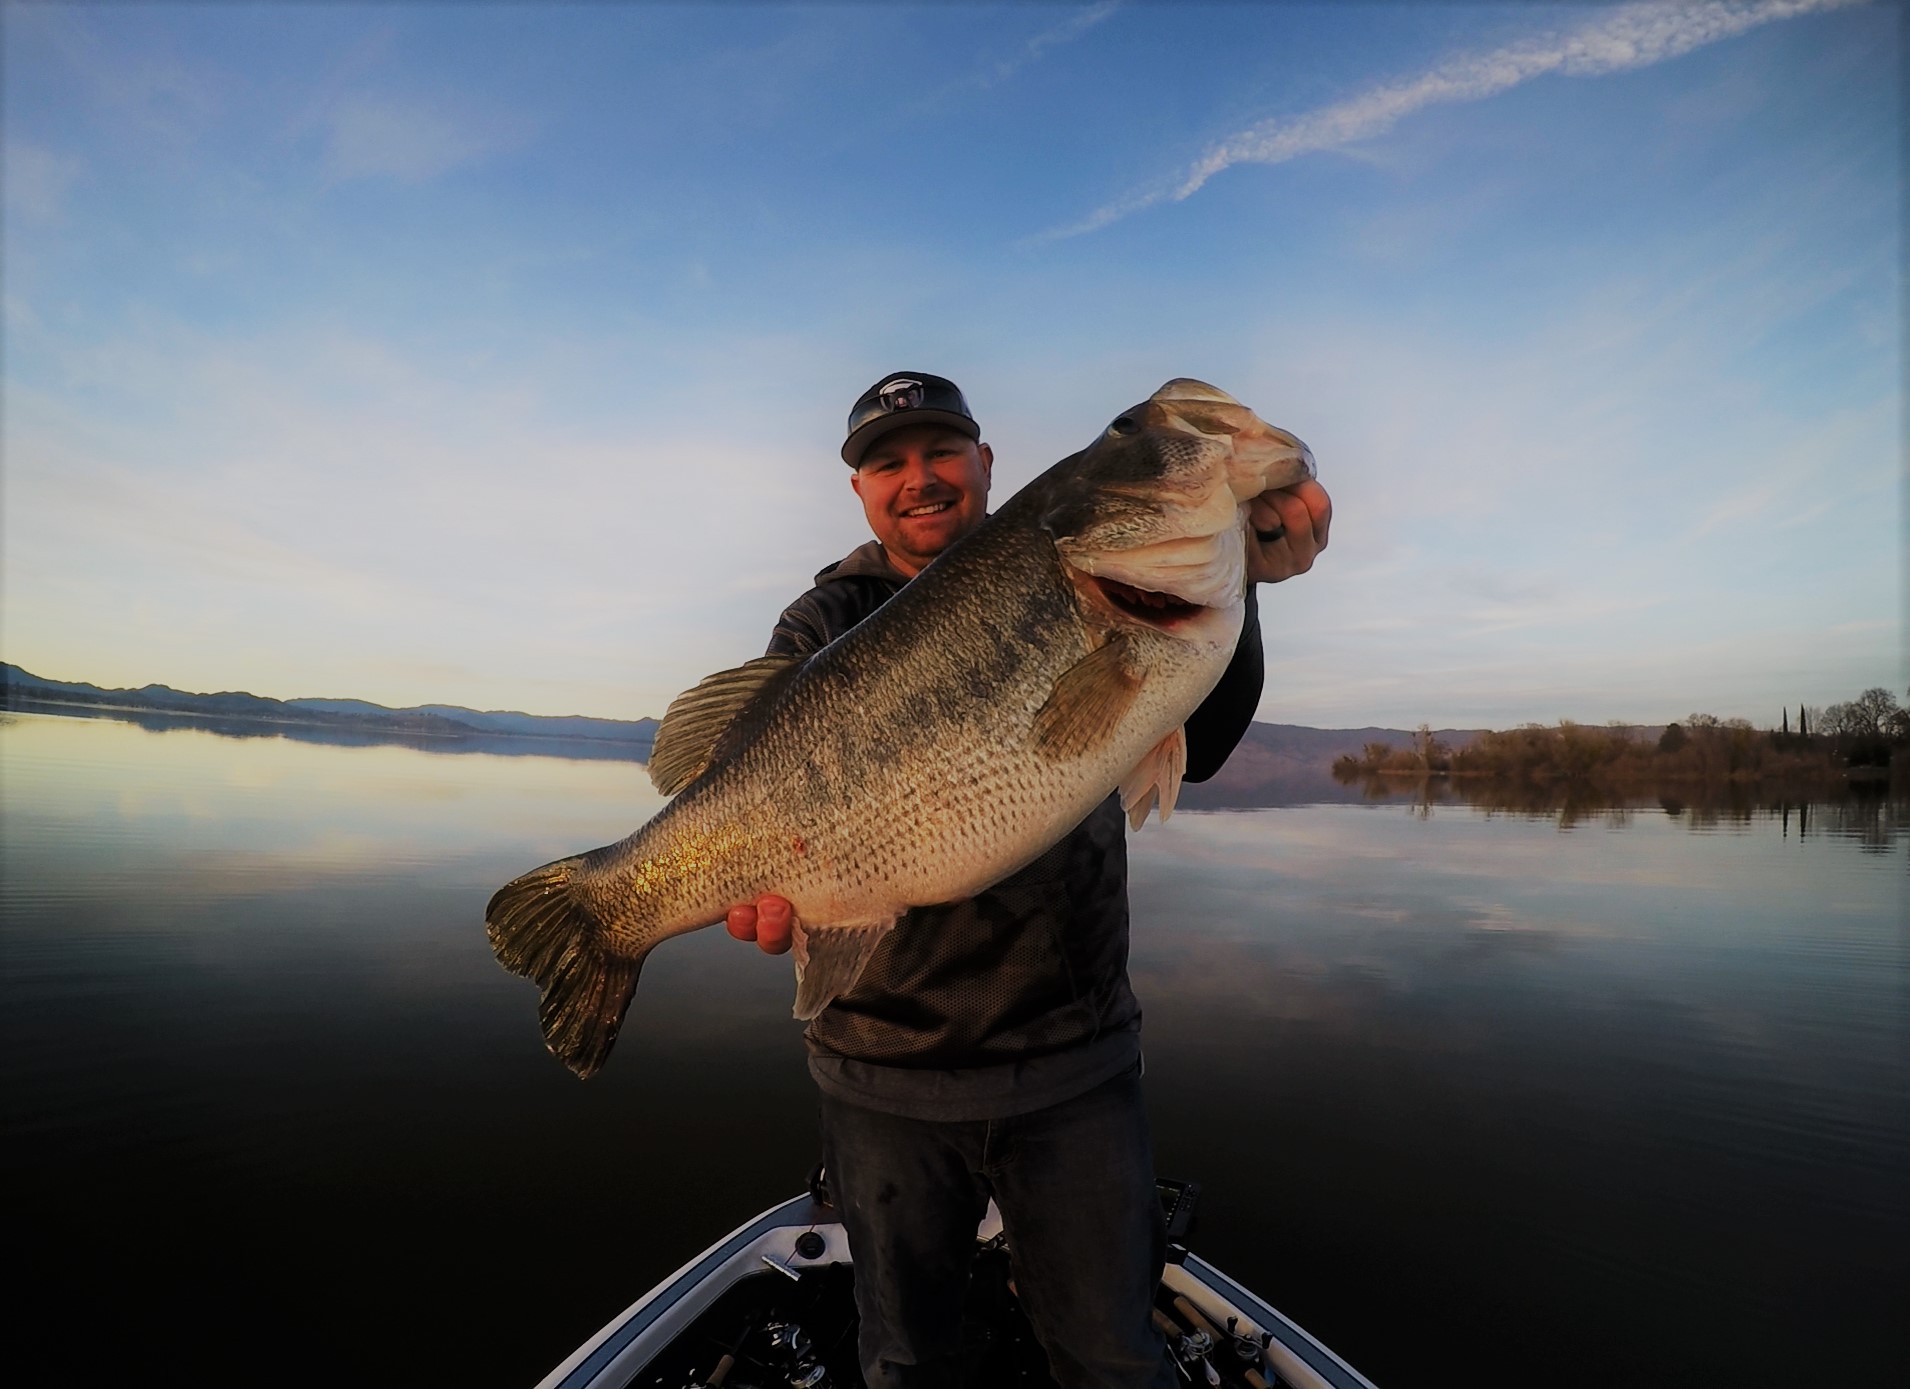 10 Pounder on the Lipless Crankbait! — Tactical Bassin' - Bass